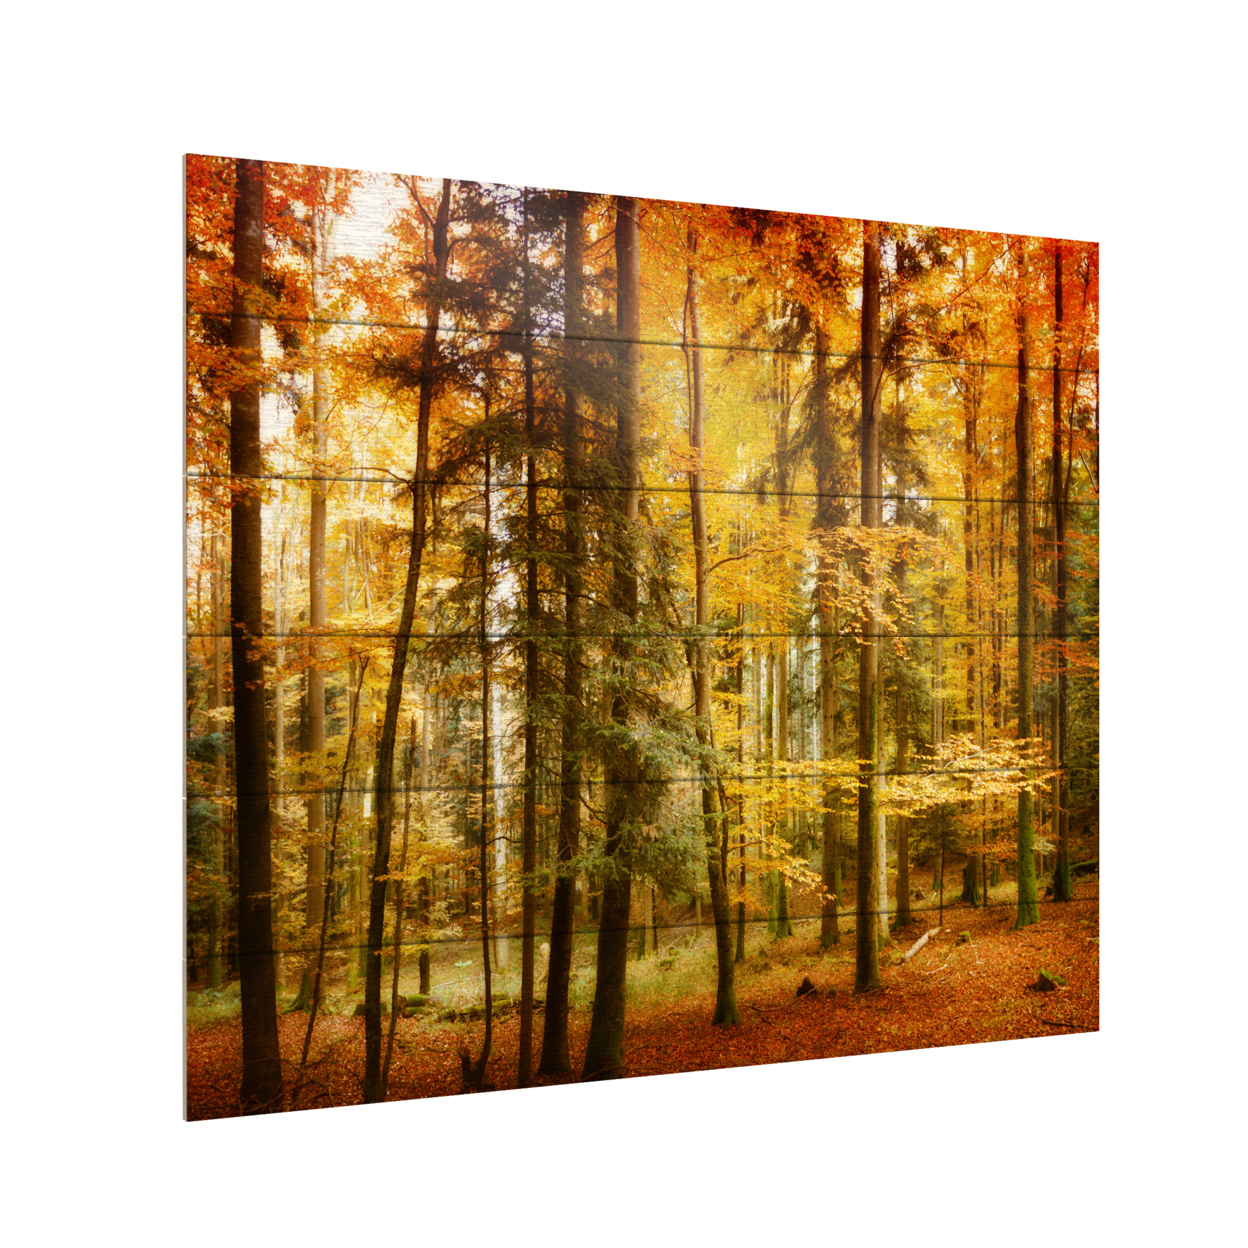 Wooden Slat Art 18 X 22 Inches Titled Brilliant Fall Color Ready To Hang Home Decor Picture